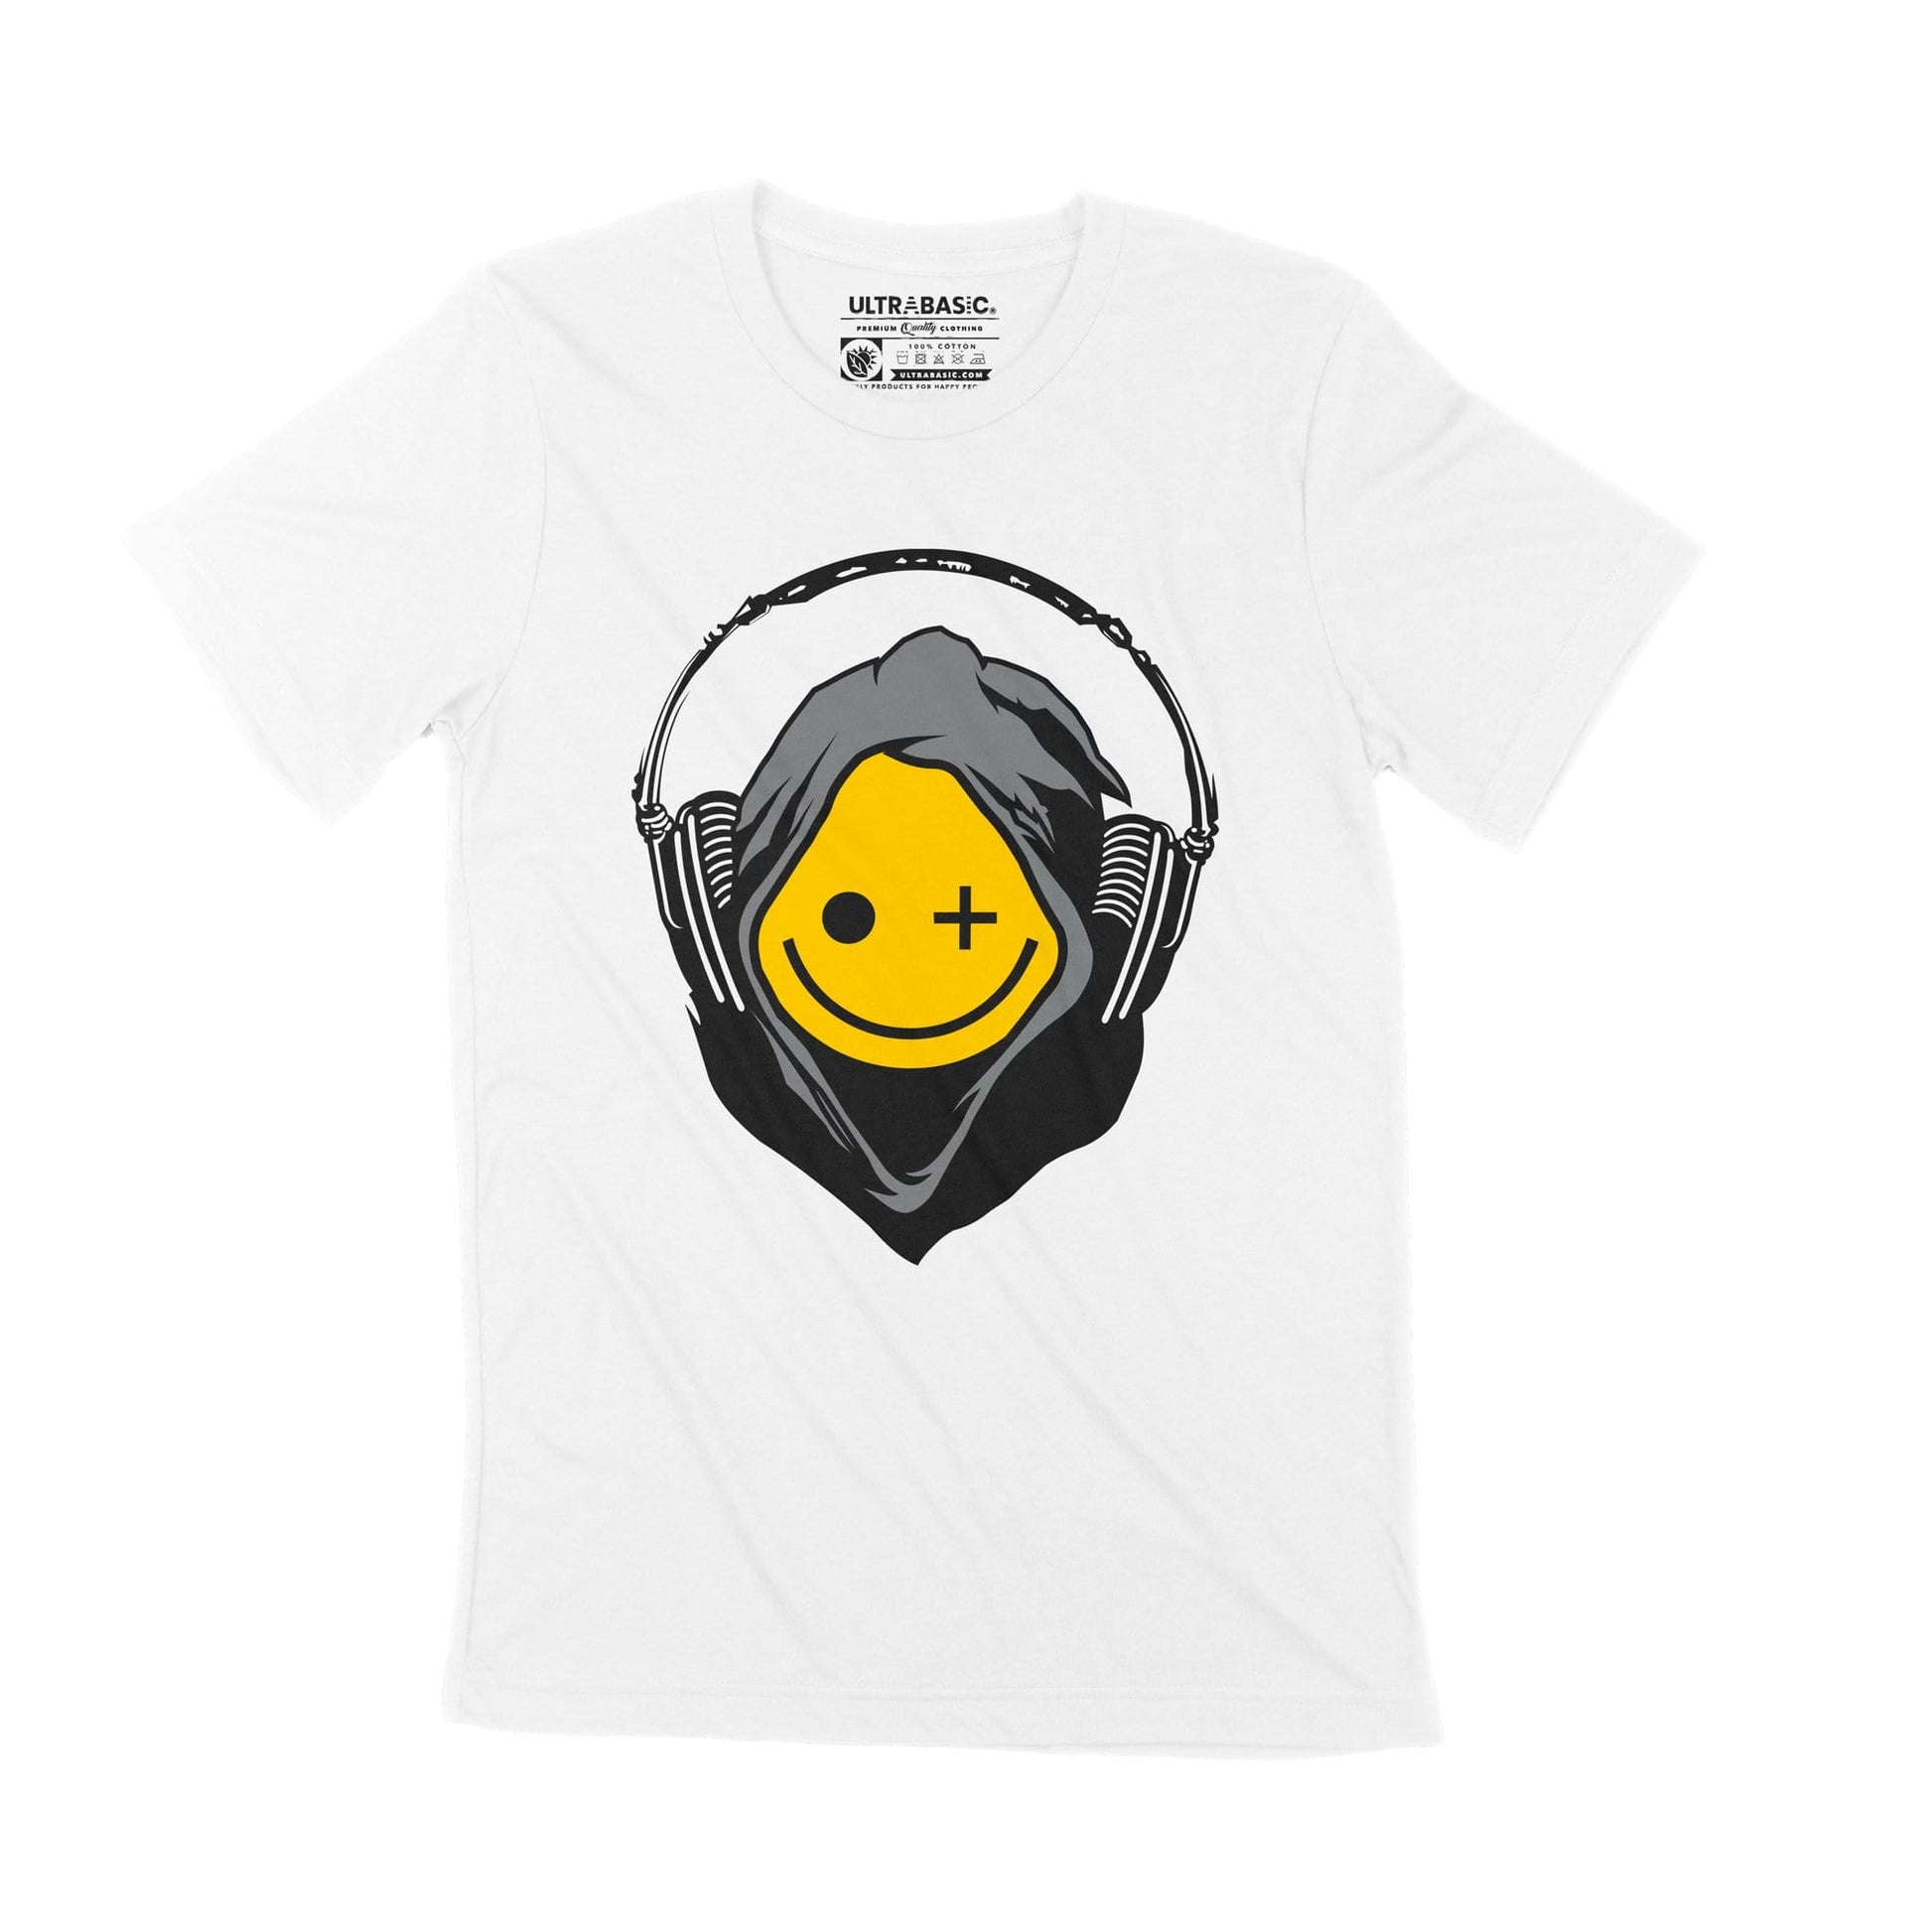 music gifts hip hop electro house disco clubbing mastering pop culture smiley lifestyle graphic tee funny tshirts tshirt design